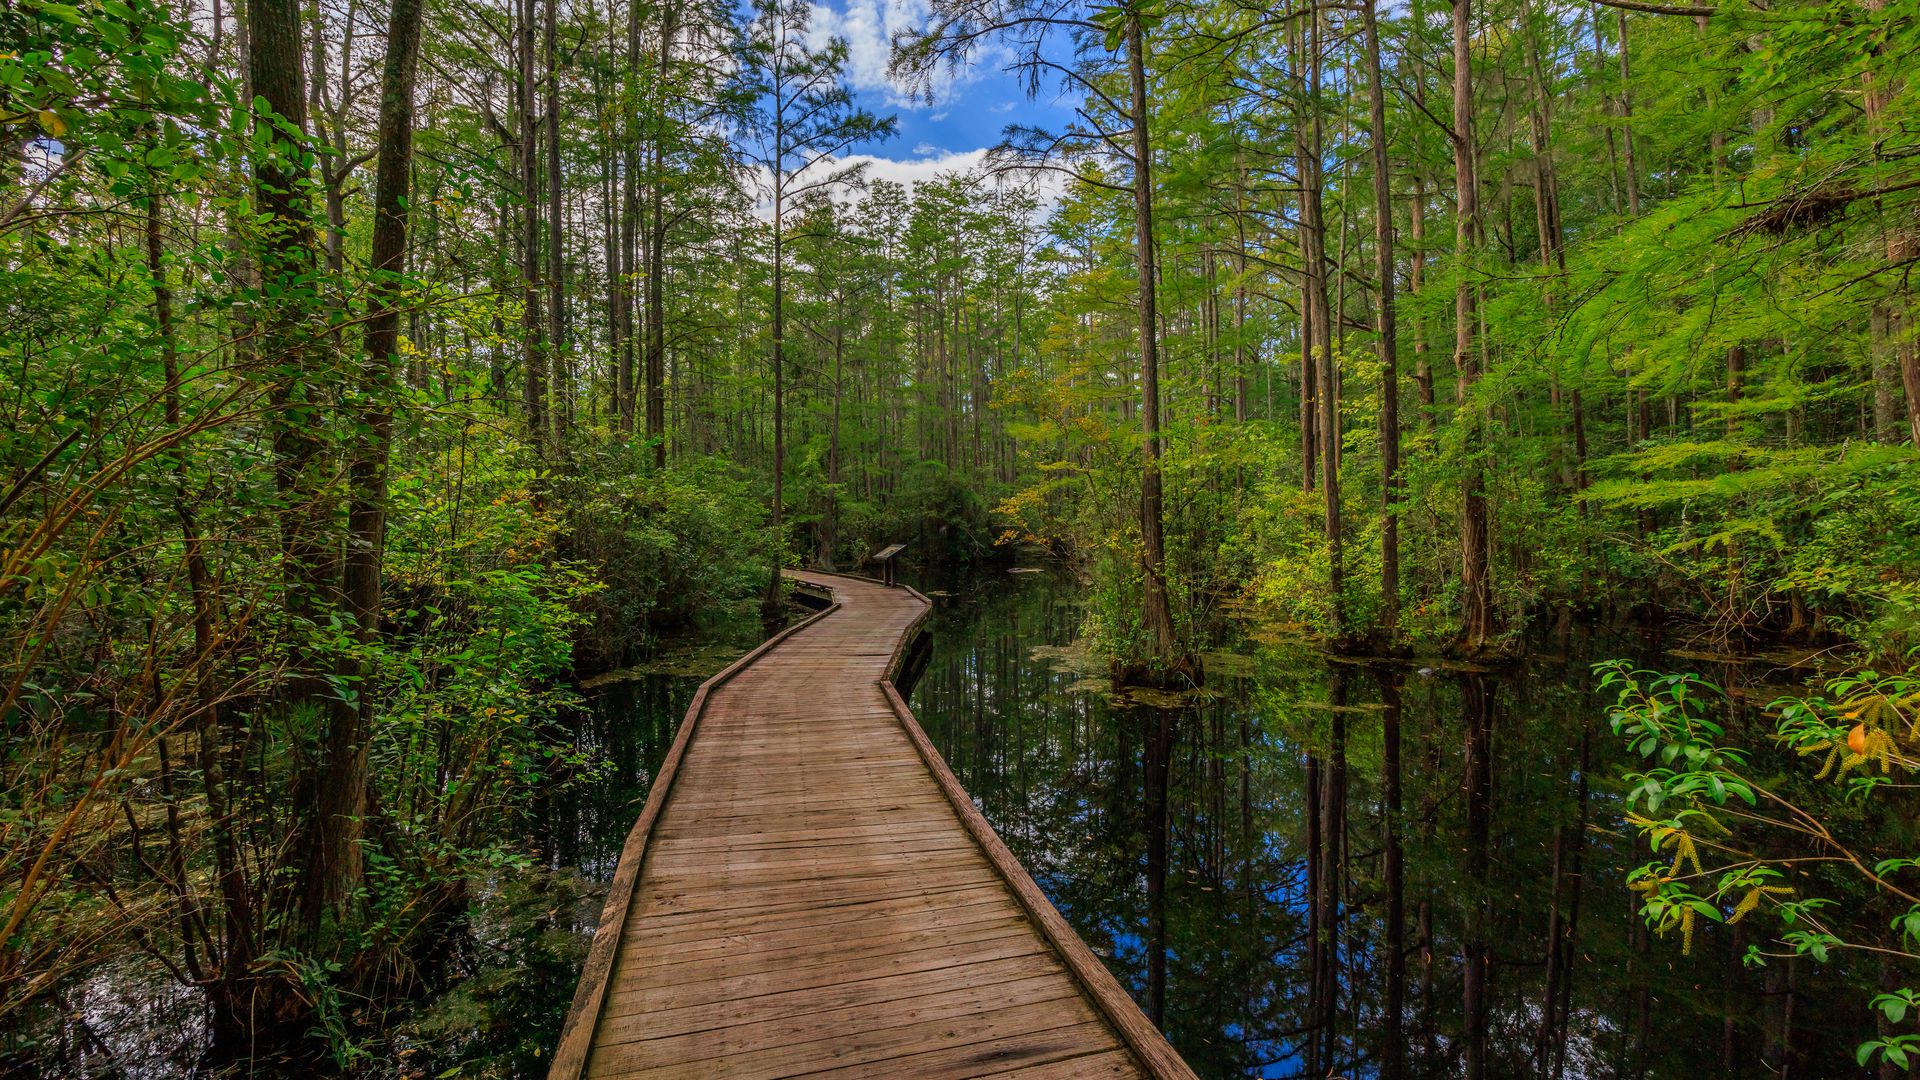 Download wallpaper 1920x1080 path, trees, forest, swamp, nature full hd ...